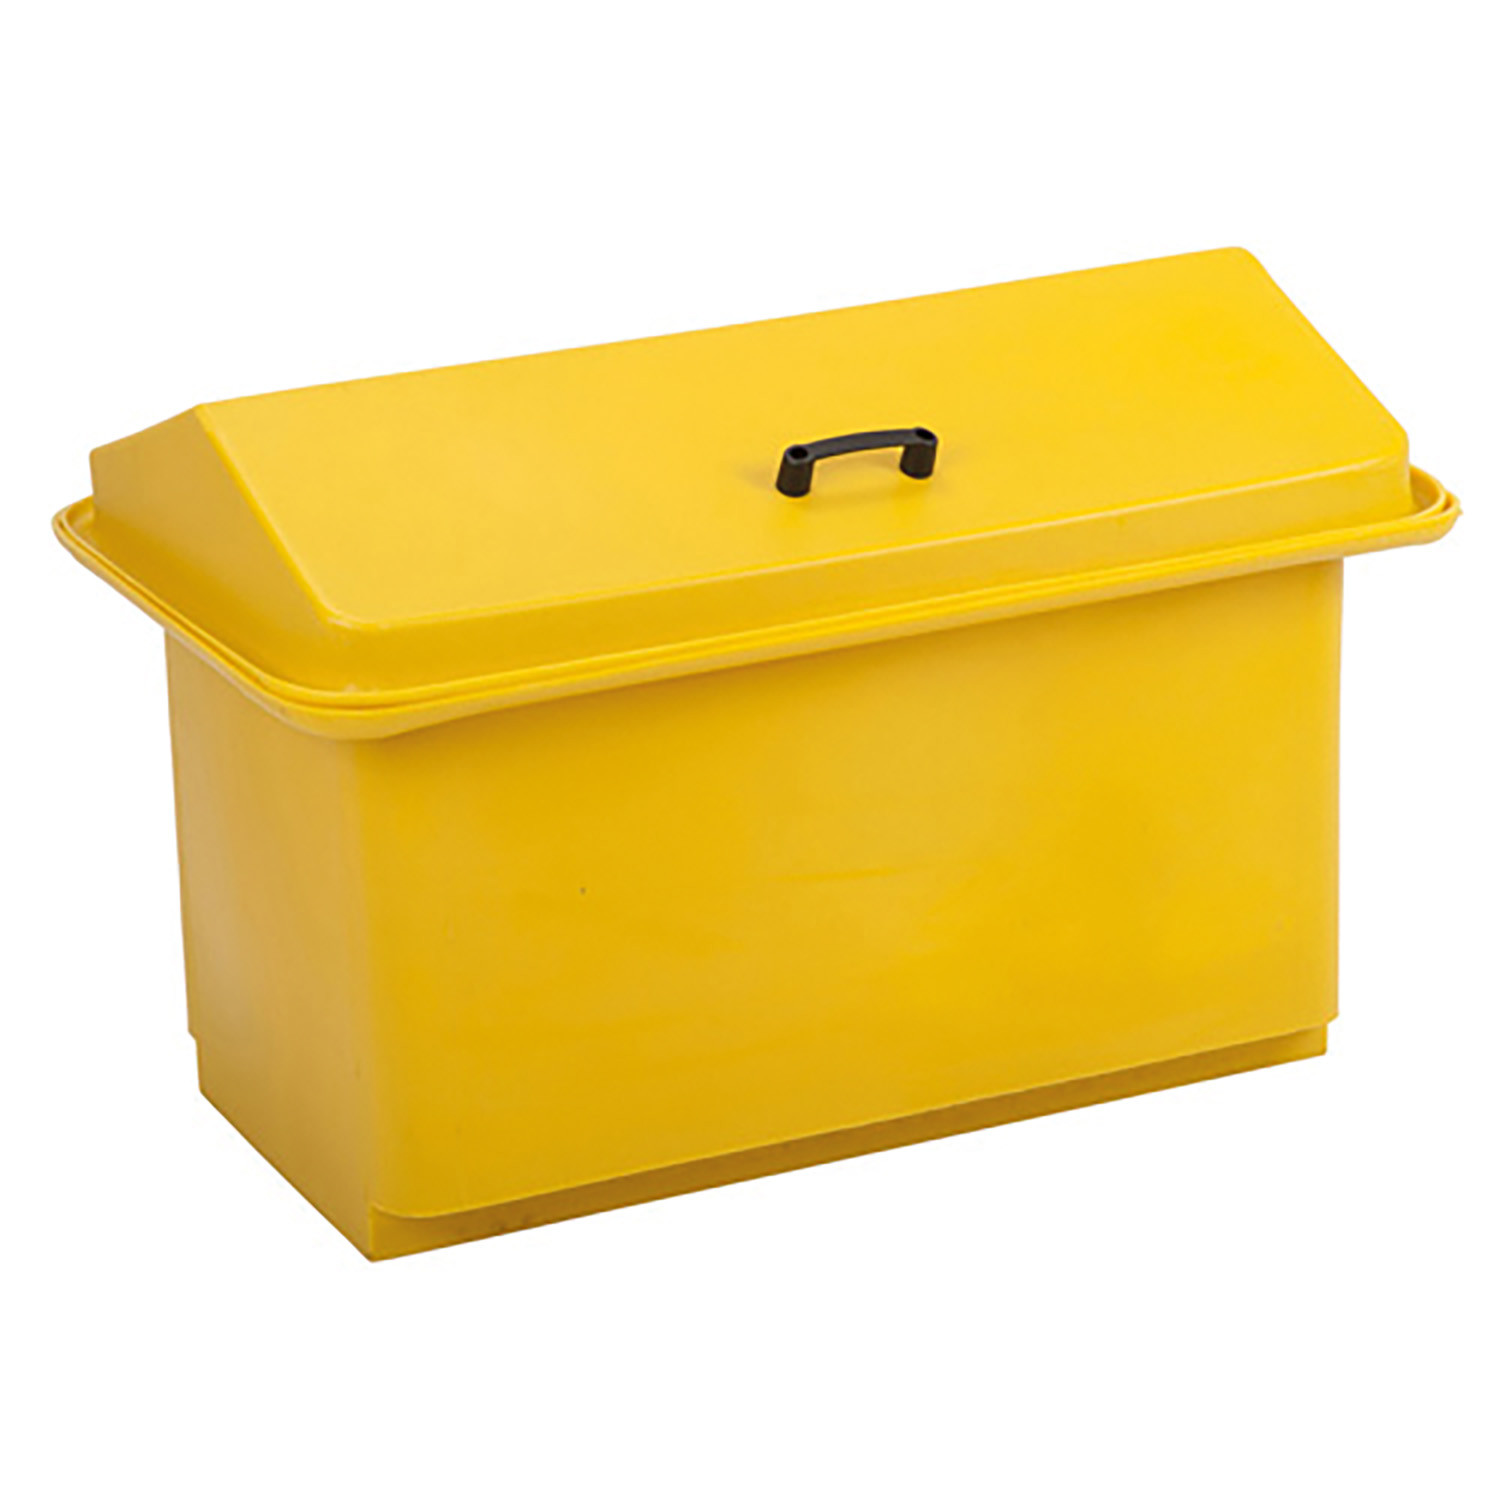 STUBBS STATIC CHEST ONE COMPARTMENT S5831 YELLOW ONE COMPARTMENT STATIC